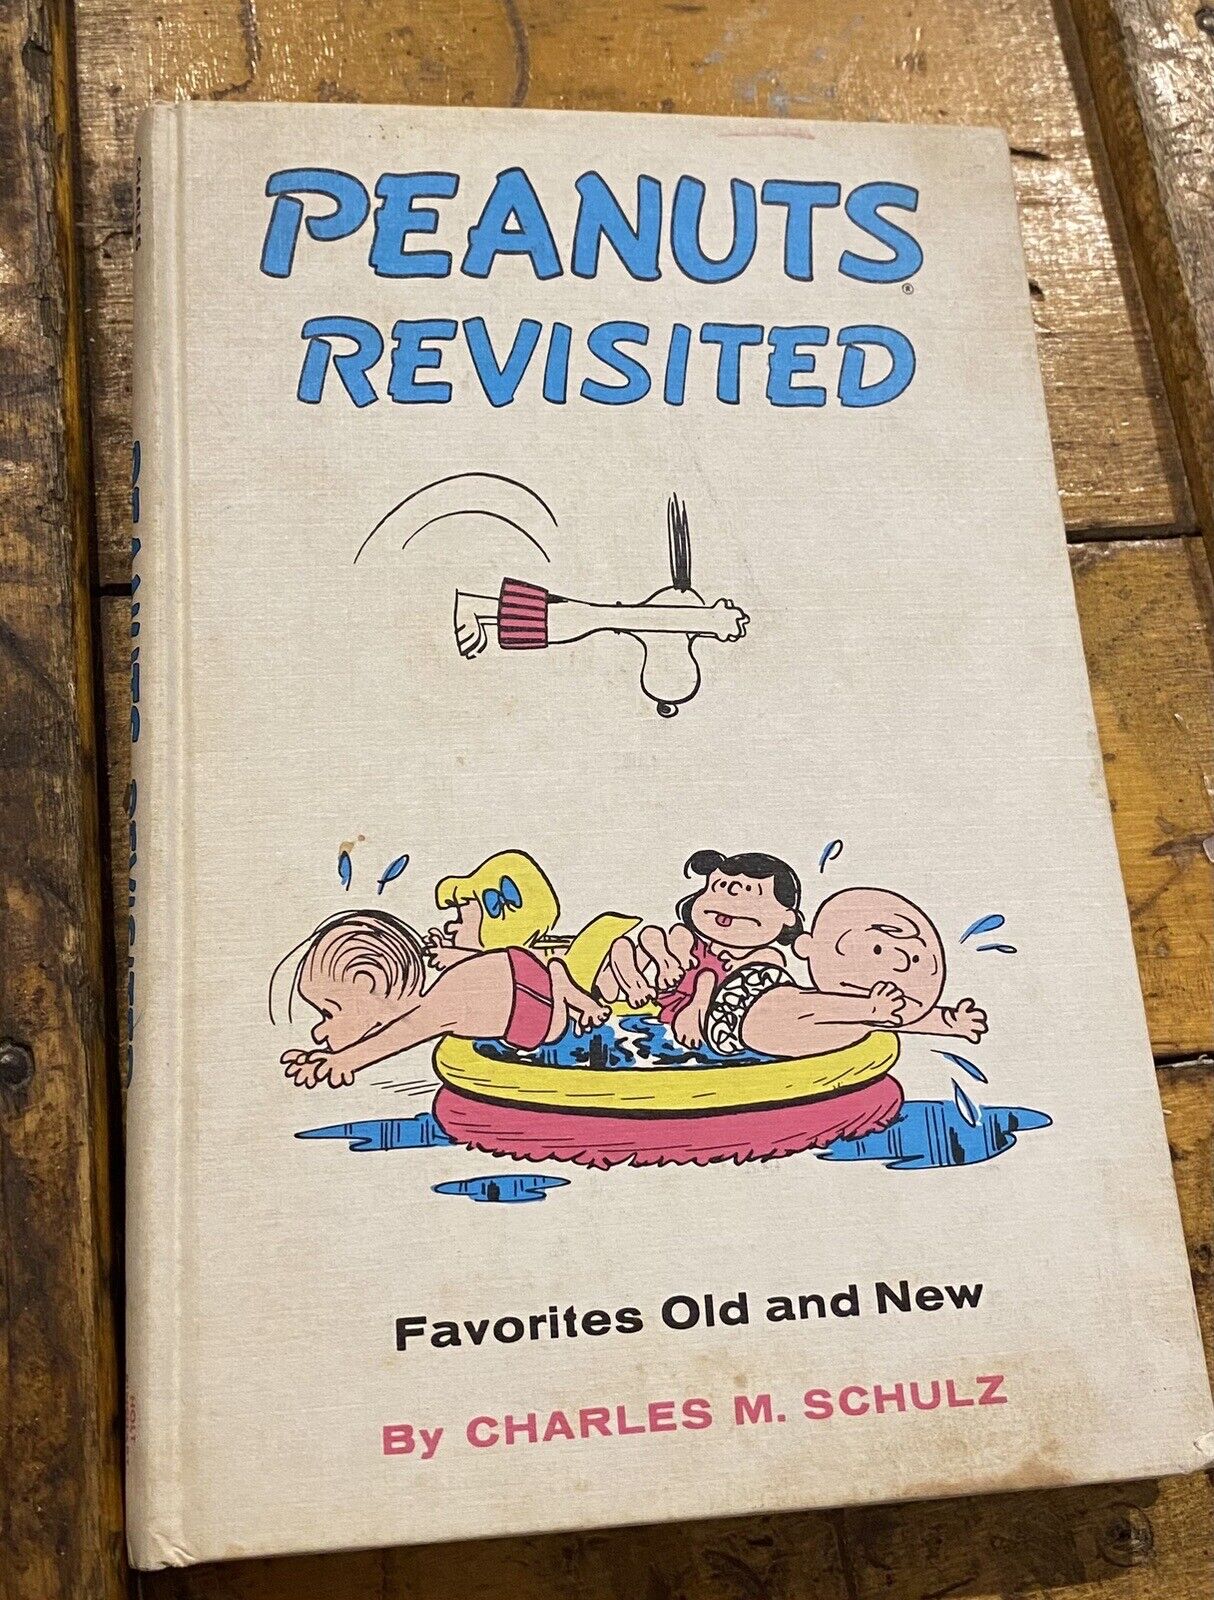 1959 Comics Compilation Hardcover Peanuts Revisited Favorites Old And New Schulz